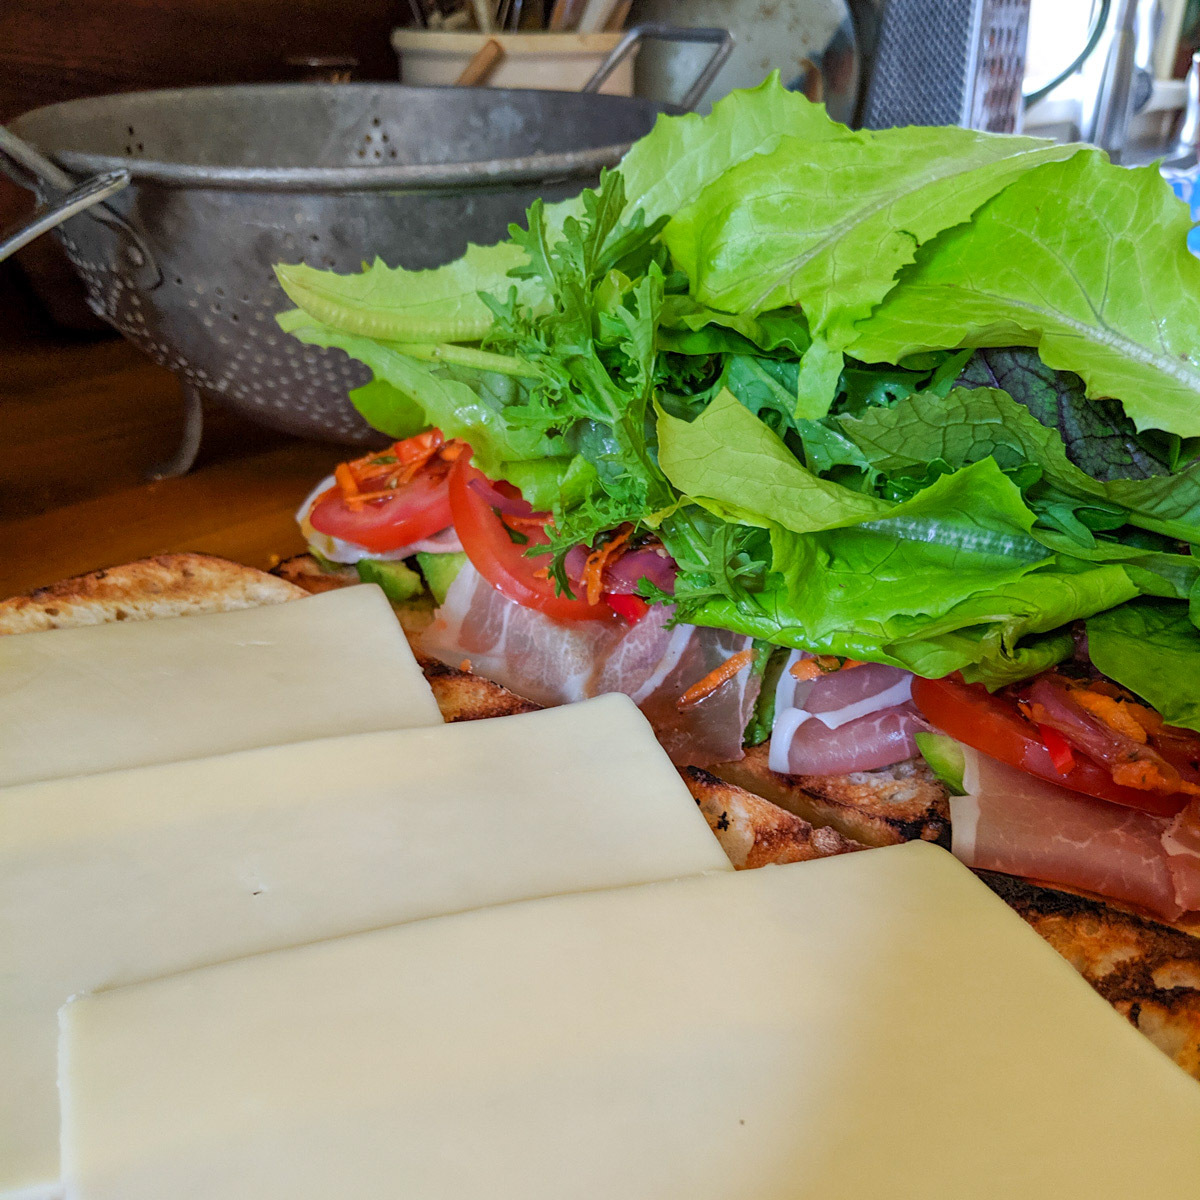 Italian Subs being made, piled with prosciutto, giardiniera and lettuce greens.